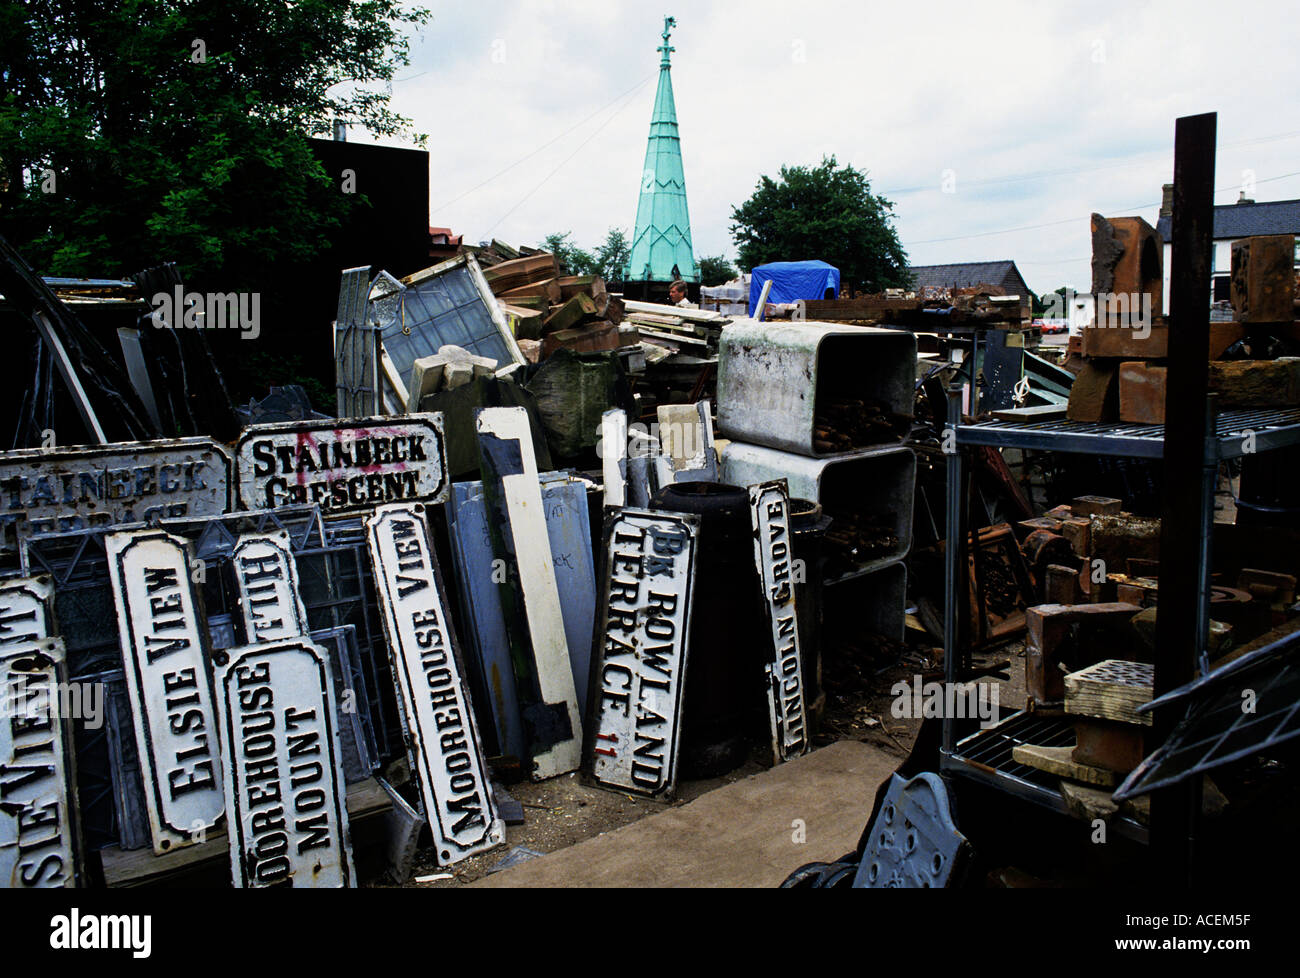 https://c8.alamy.com/comp/ACEM5F/reclamation-specialist-with-huge-collection-of-items-resued-from-demolition-ACEM5F.jpg